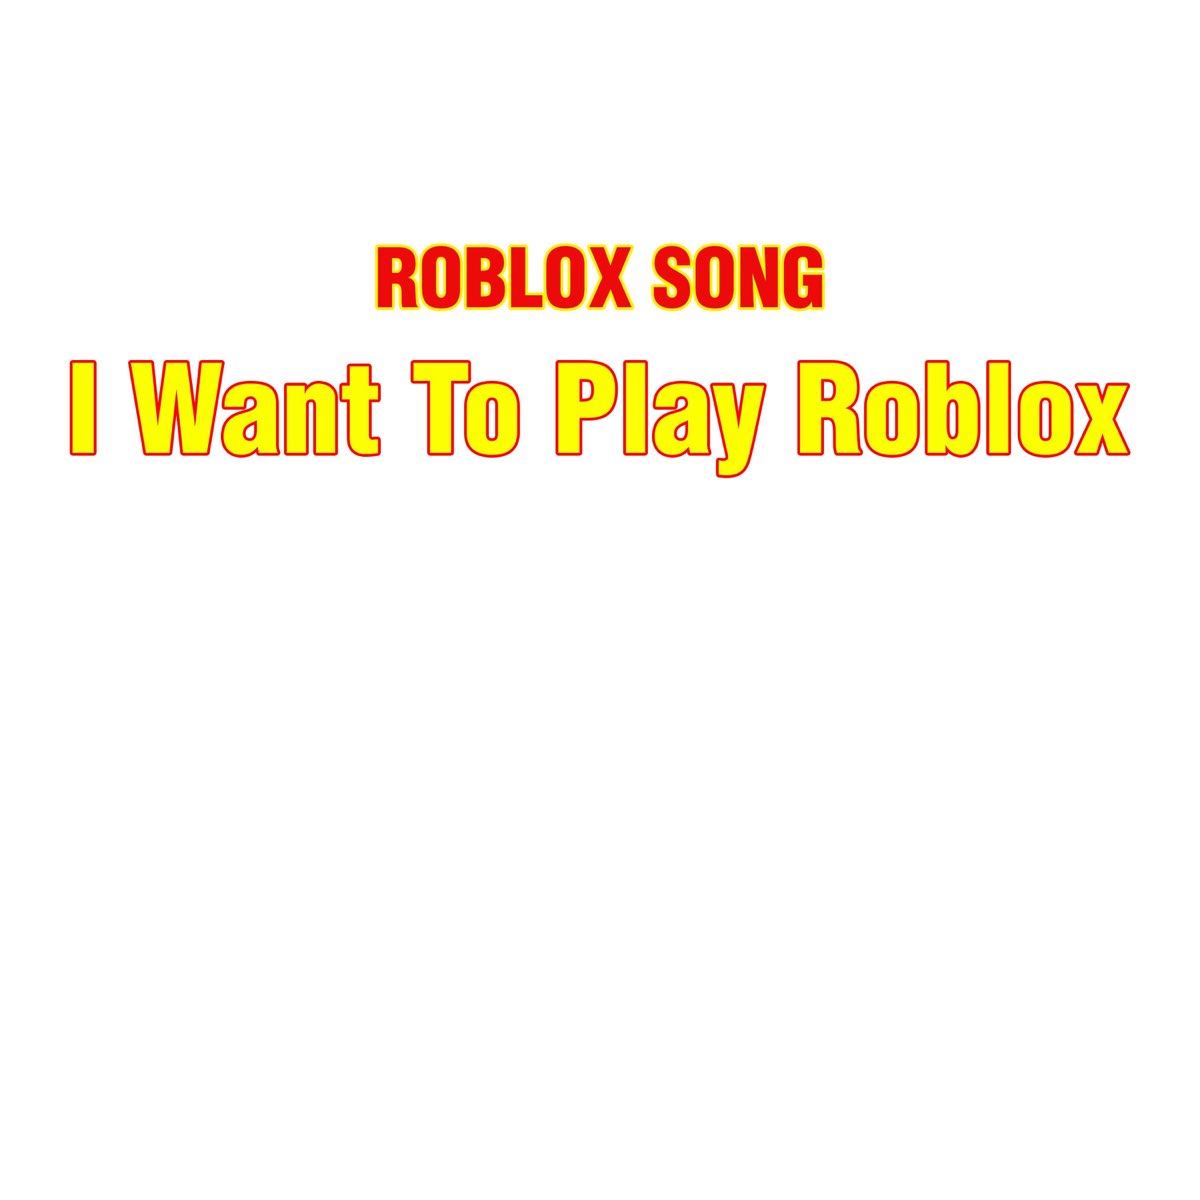 want to play roblox